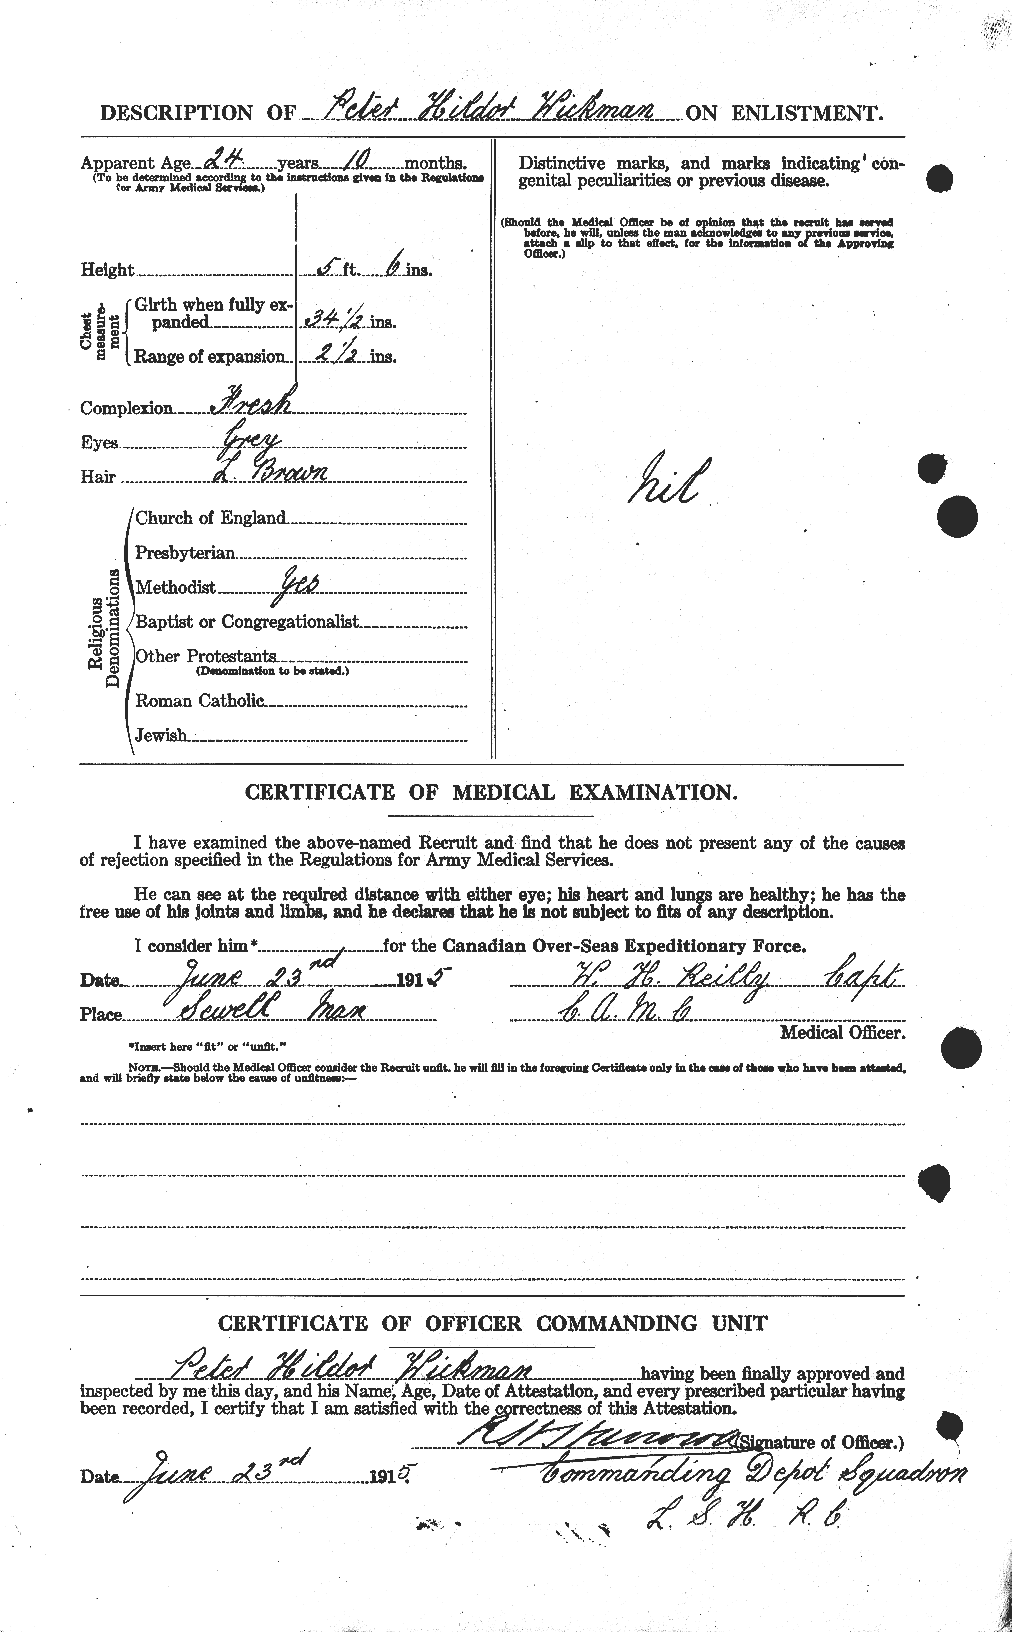 Personnel Records of the First World War - CEF 673984b